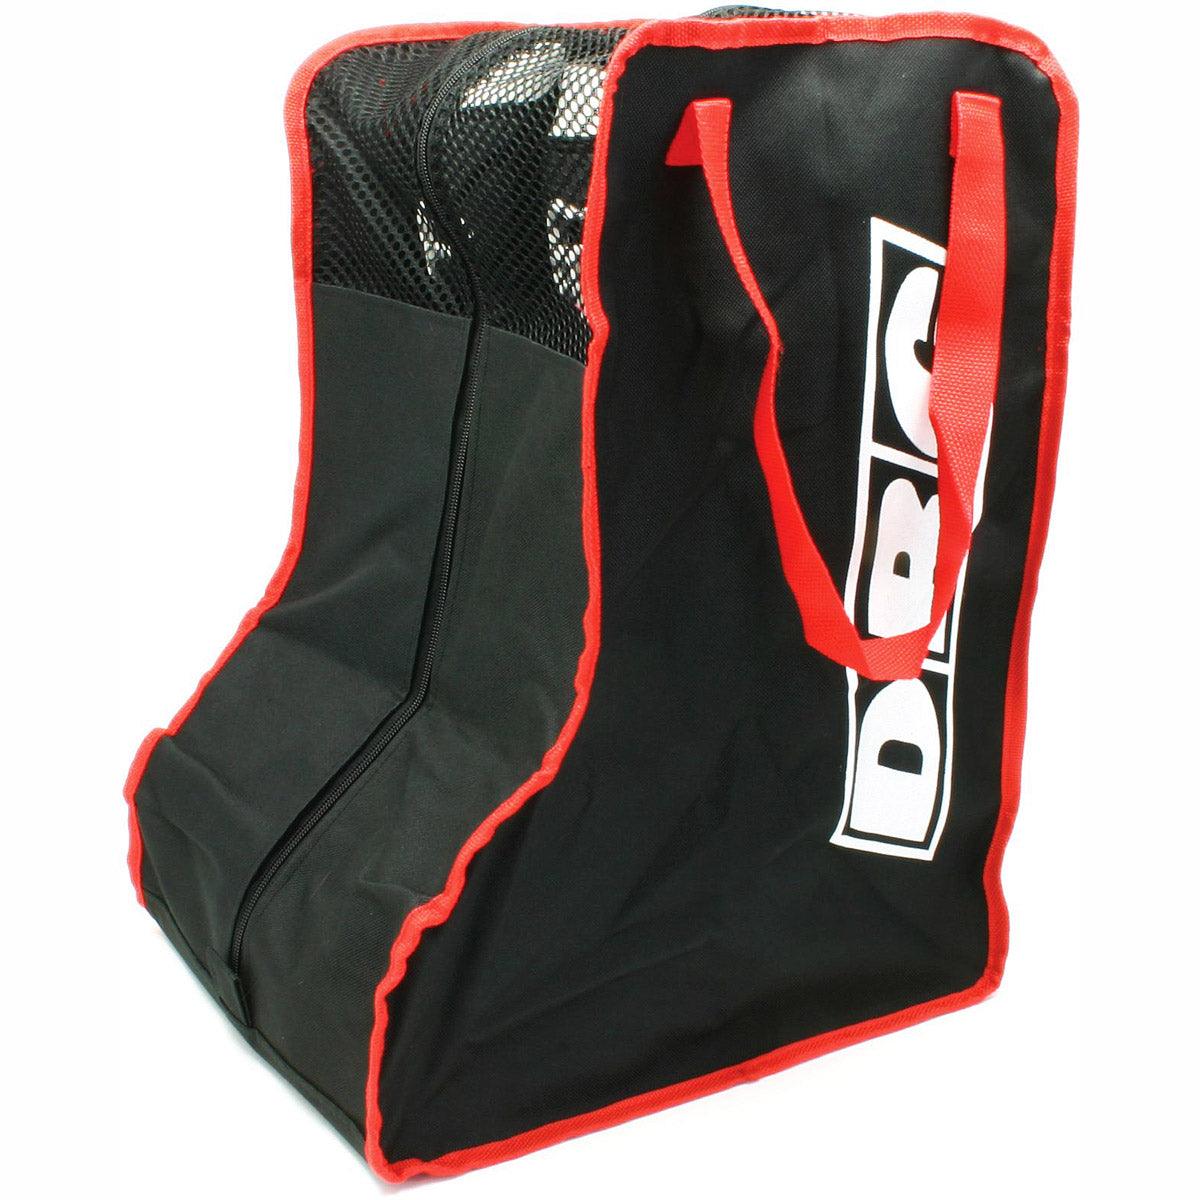 DRC Motocross Boots Bag | Motorcycle Gear Storage - The Motocrosshut